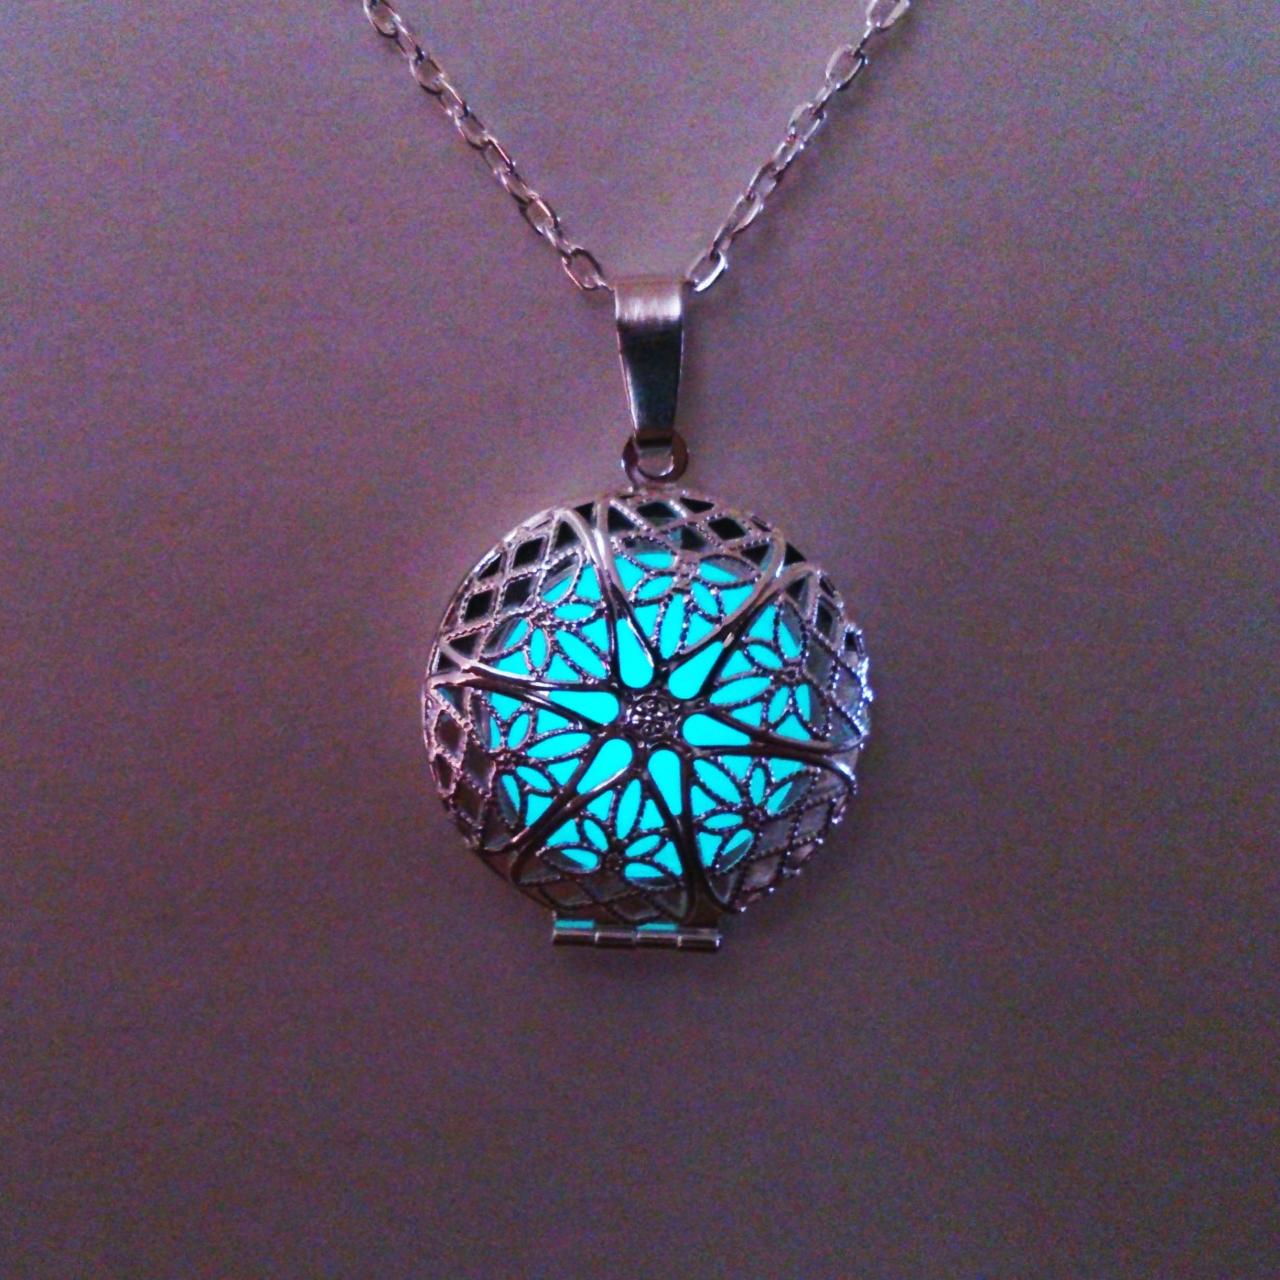 Aqua Glowing Necklace - Glowing Jewelry - Christmas Gift - Glowing Pendant - Women's Jewelry - Glow In The Dark Necklace - Gifts For Her